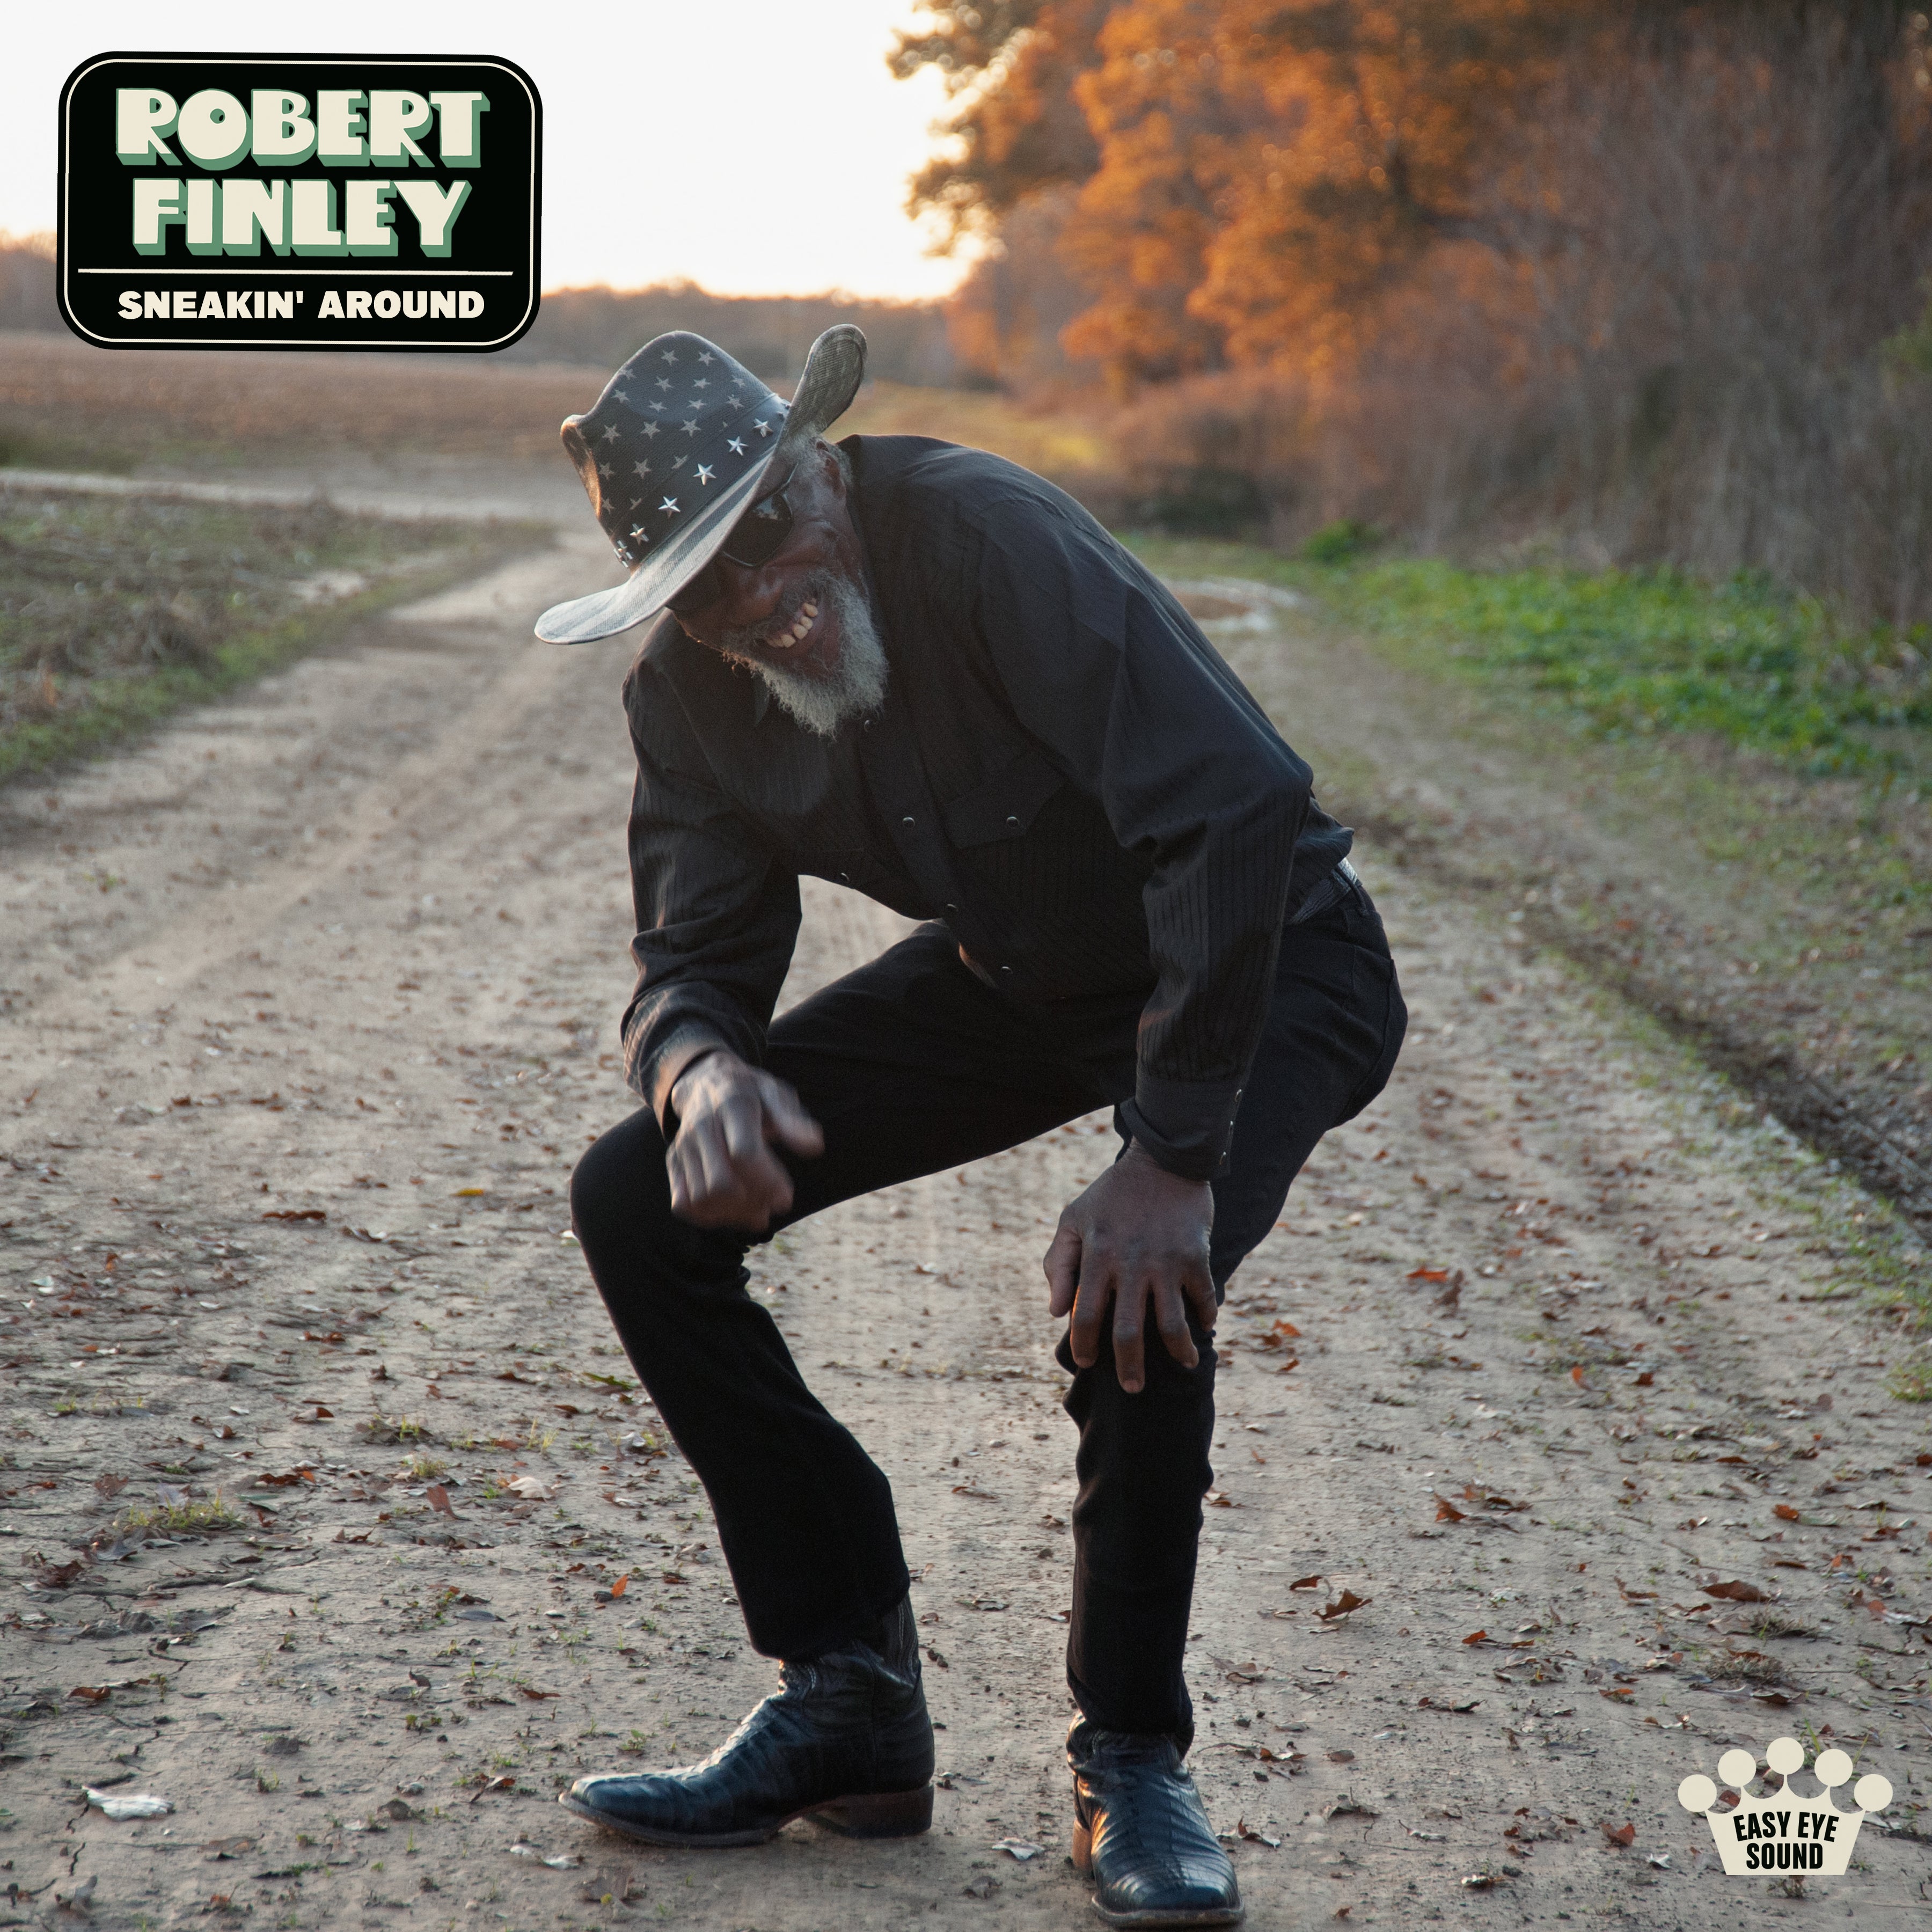 Robert Finley's new song, "Sneakin' Around" is out now!